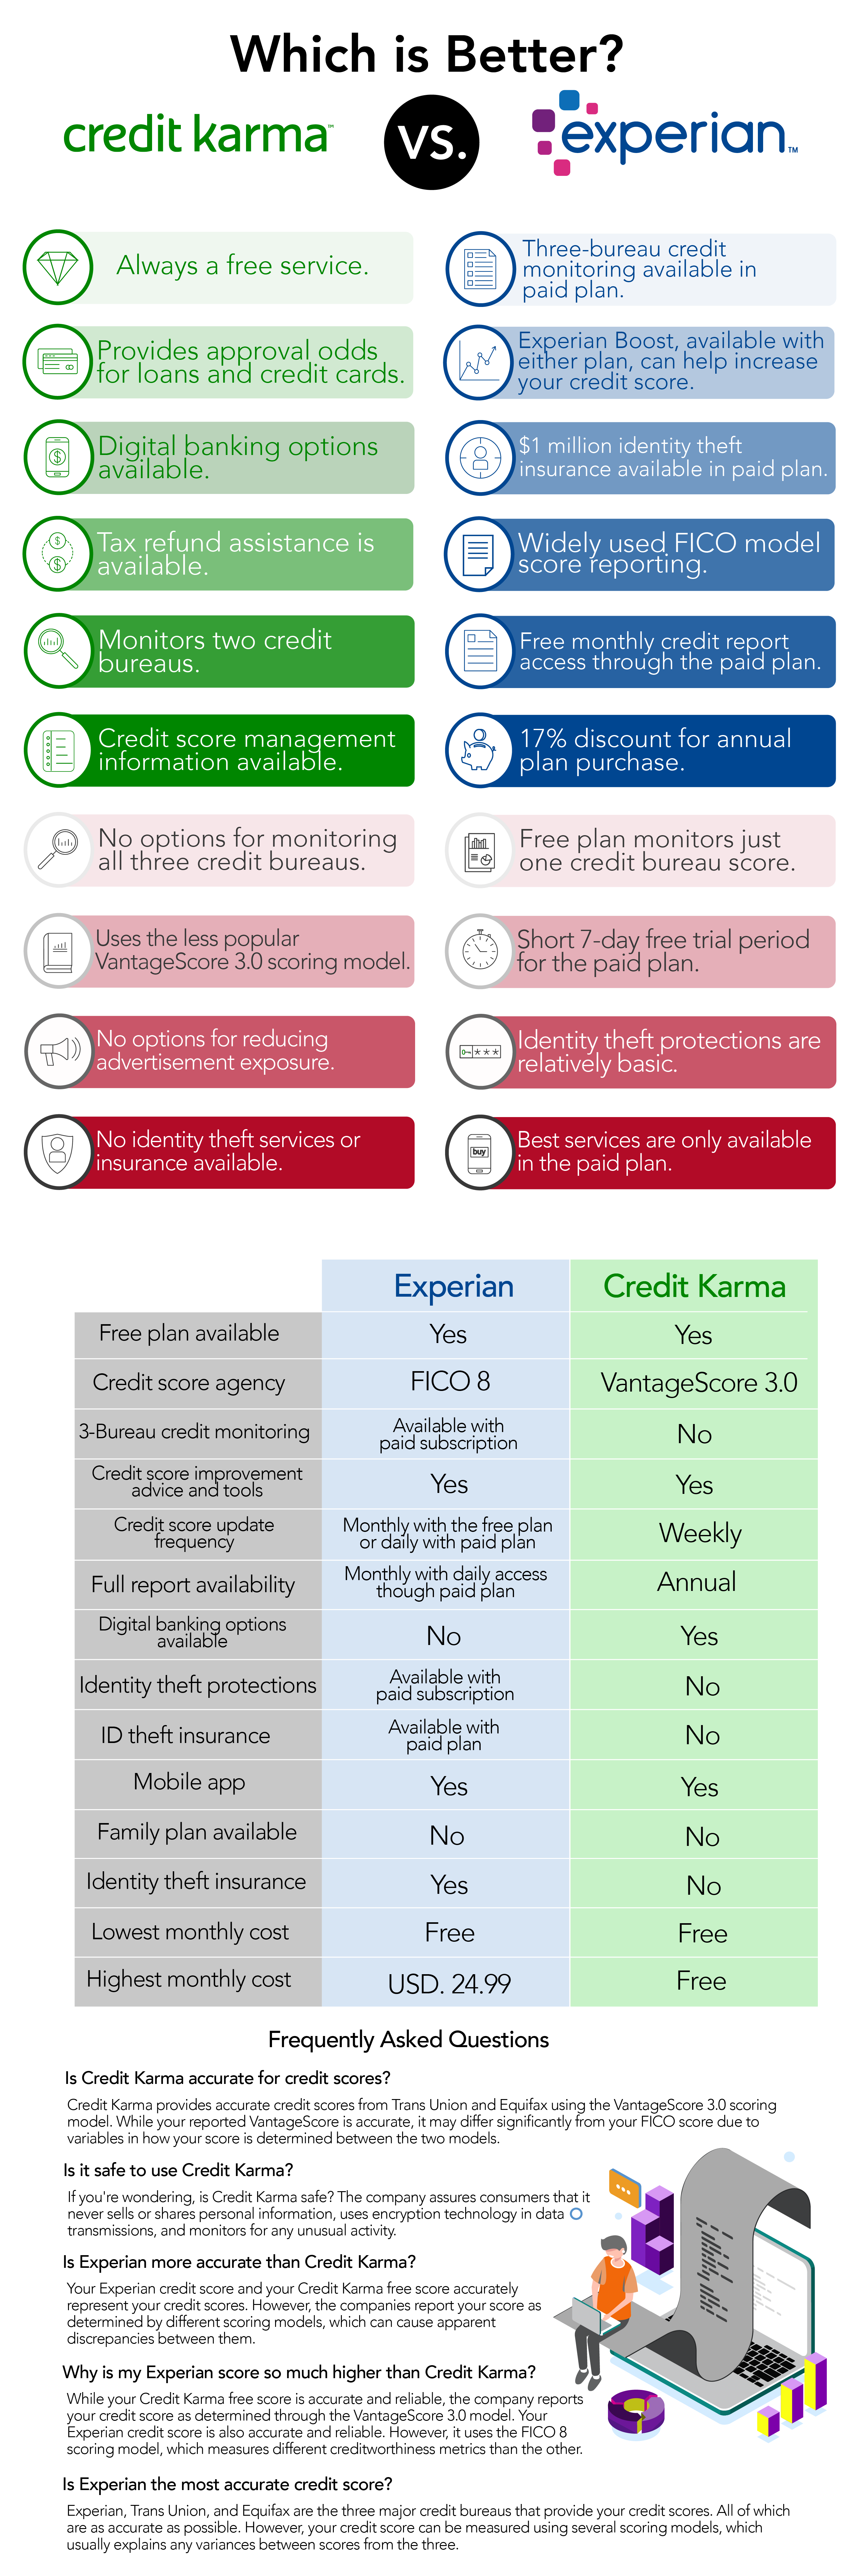 Credit Karma vs. Experian review differences and similarities 